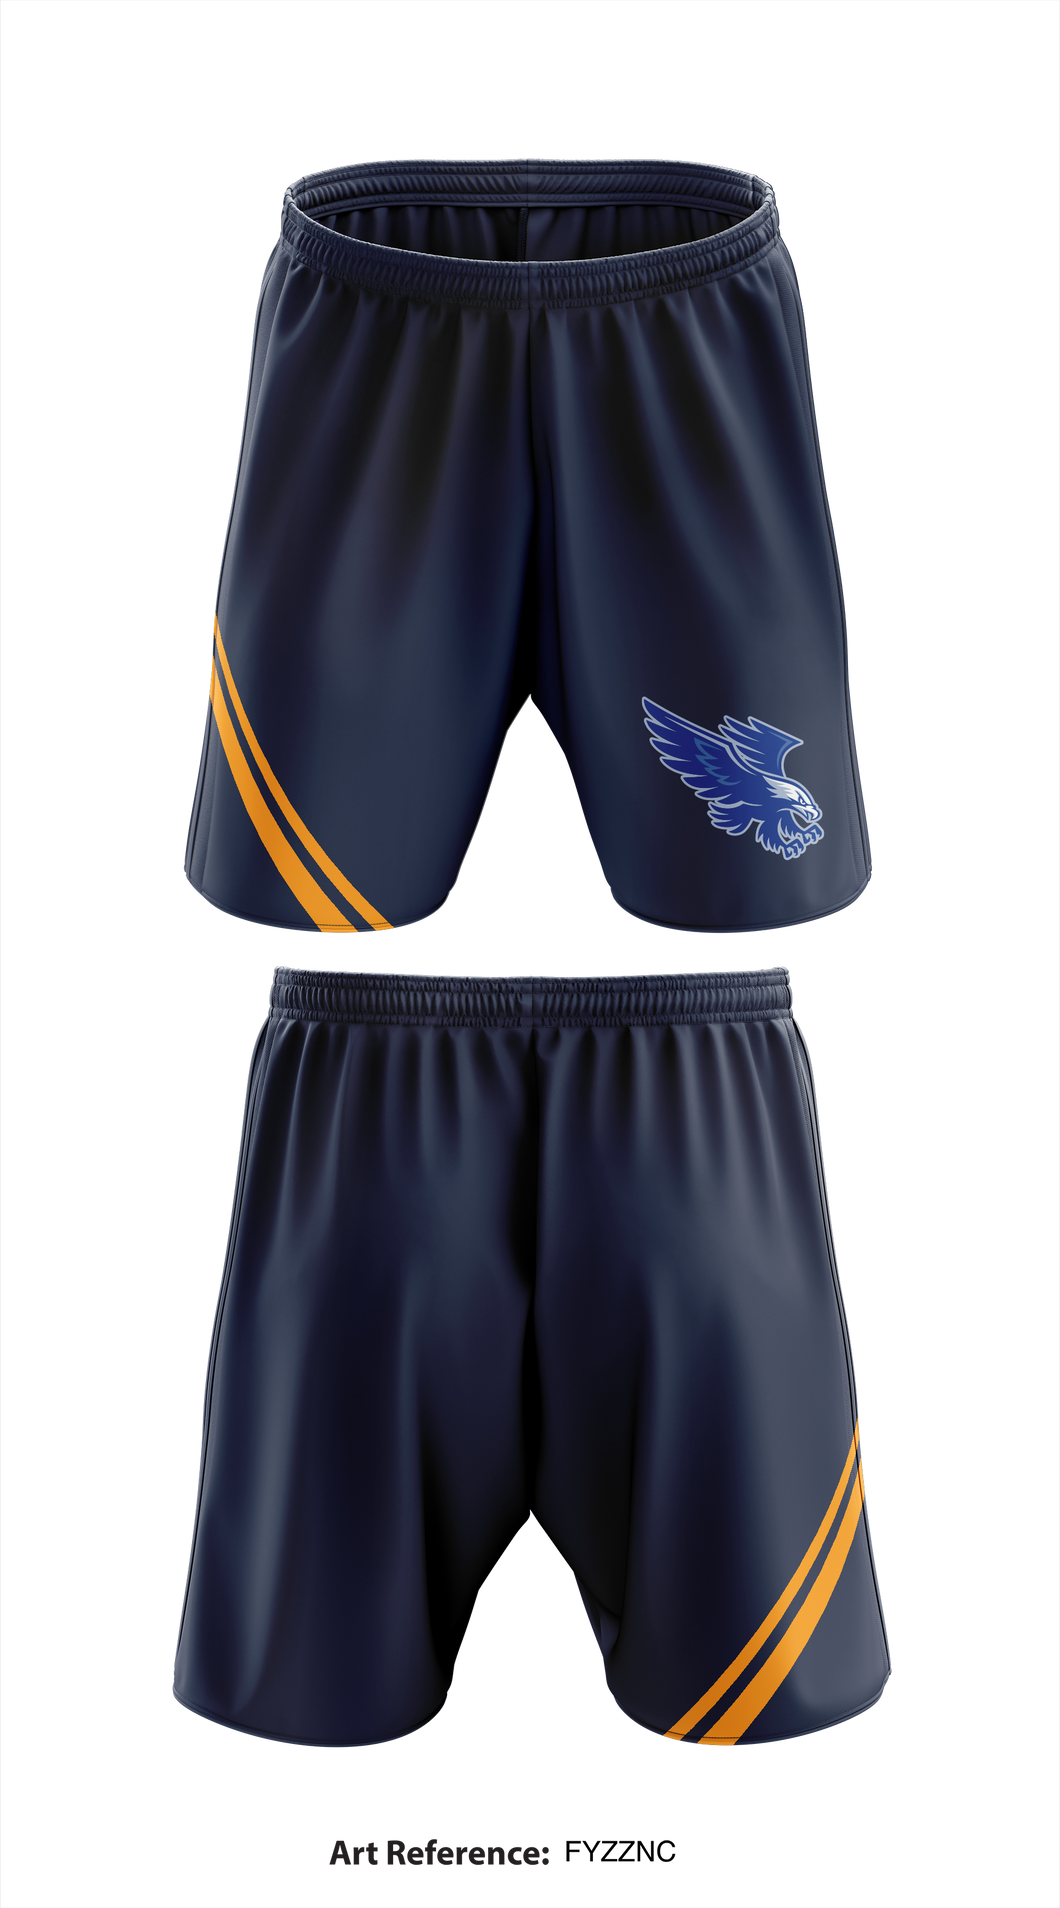 Athletic Shorts With Pockets, Factoryville Christian School, School Spirit Store, Teamtime, Team time, sublimation, custom sports apparel, team uniforms, spirit wear, spiritwear, sports uniforms, custom shirts, team store, custom team store, fundraiser sports, apparel fundraiser